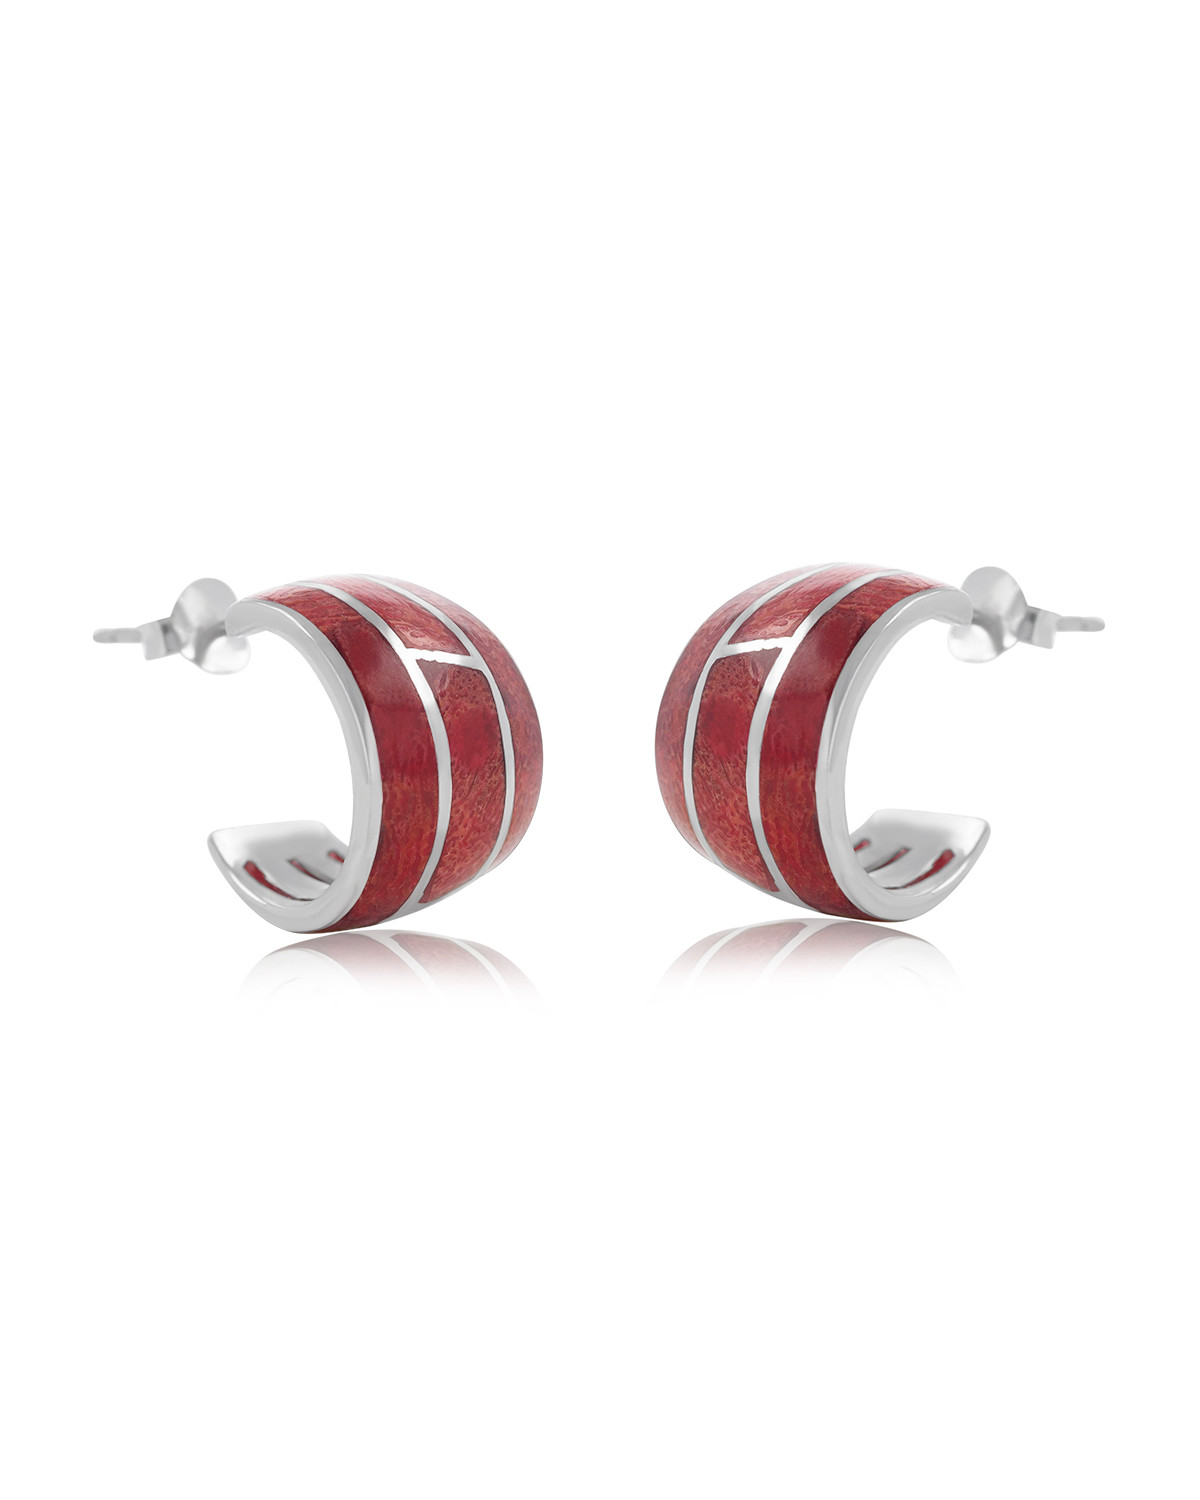 Ethnic style coral earrings in 925 silver